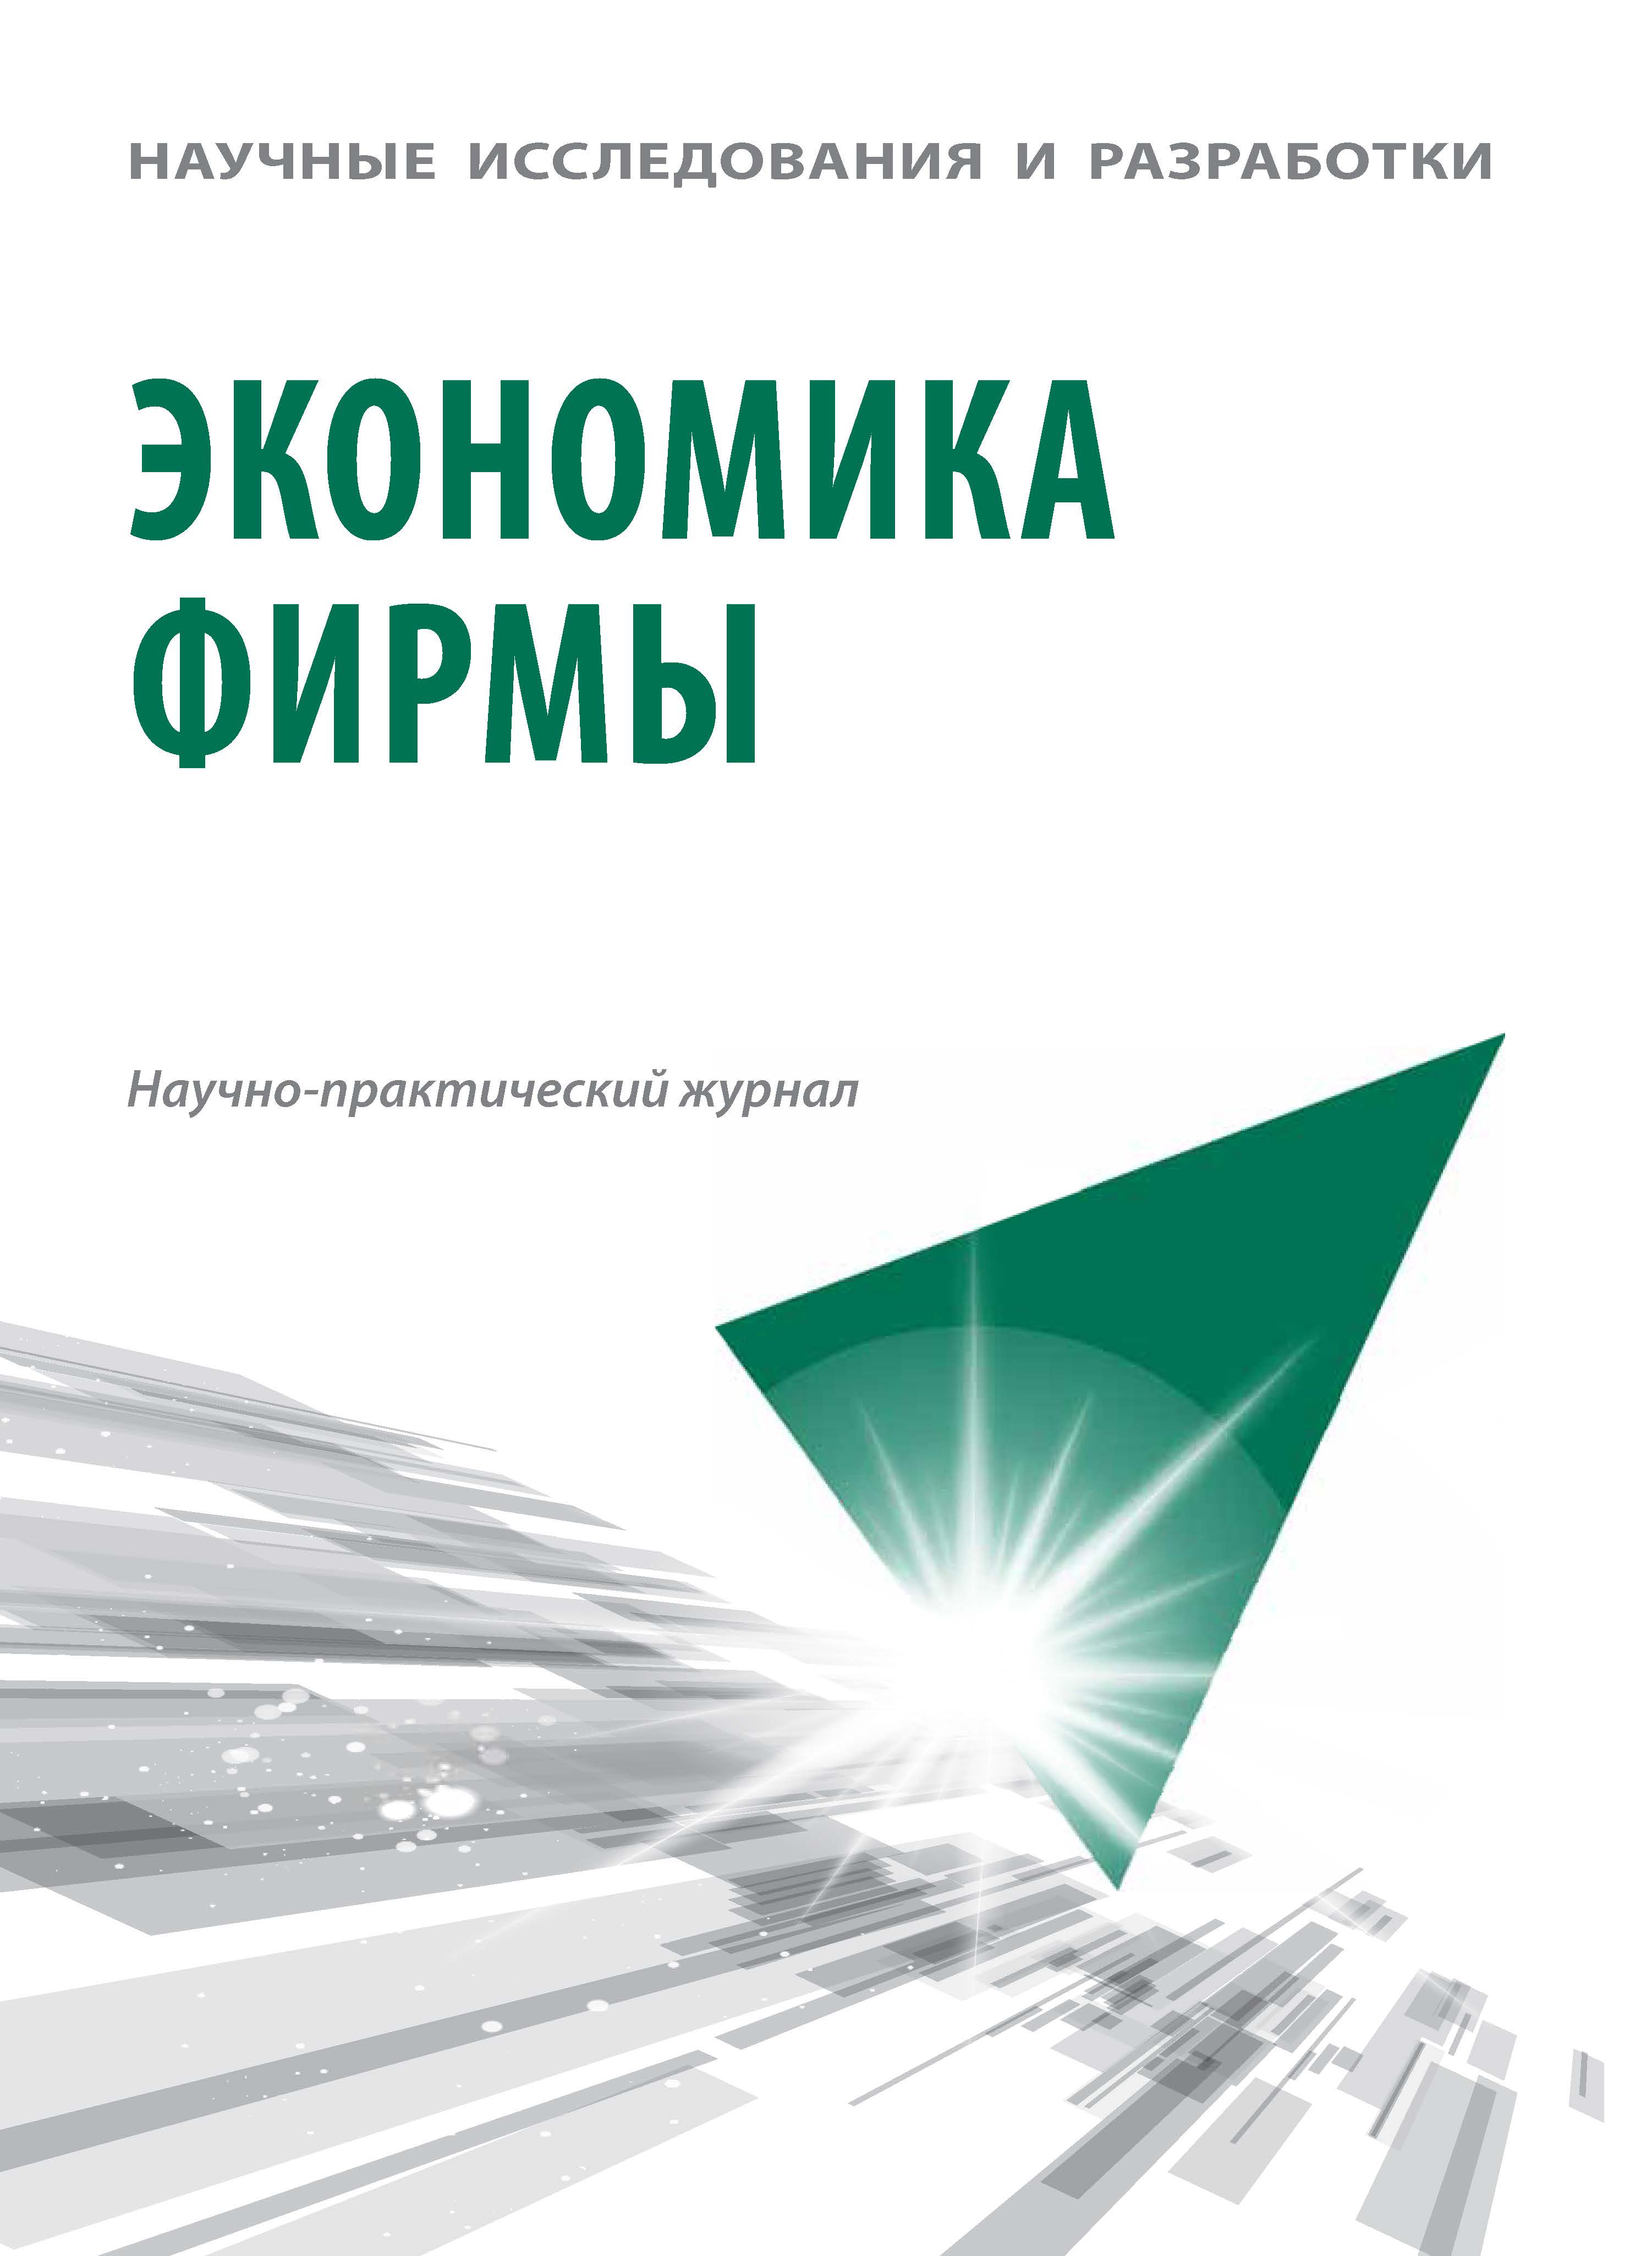                         Analysis of the Impact of Monetary Relations Between the Russian Federation and the Middle East on the Region's Economy
            